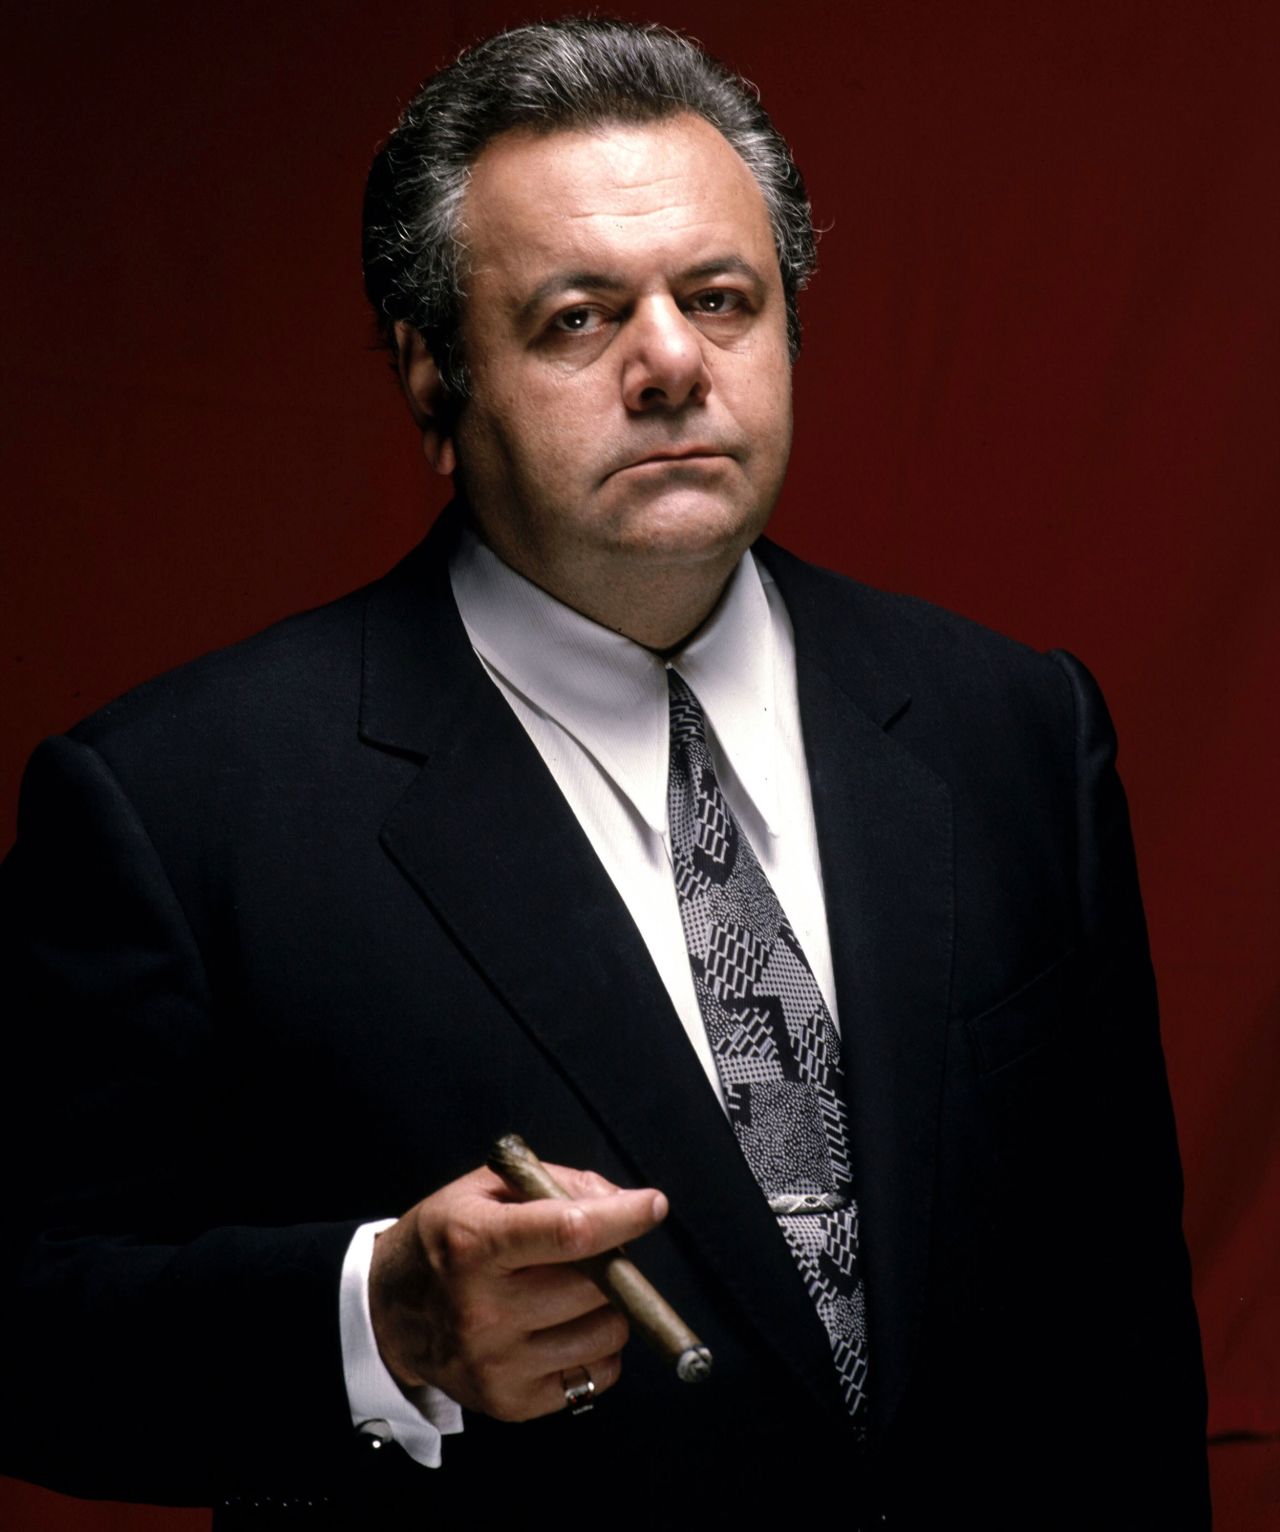 Paul Sorvino, an imposing actor whose roles ranged from the mob boss in 